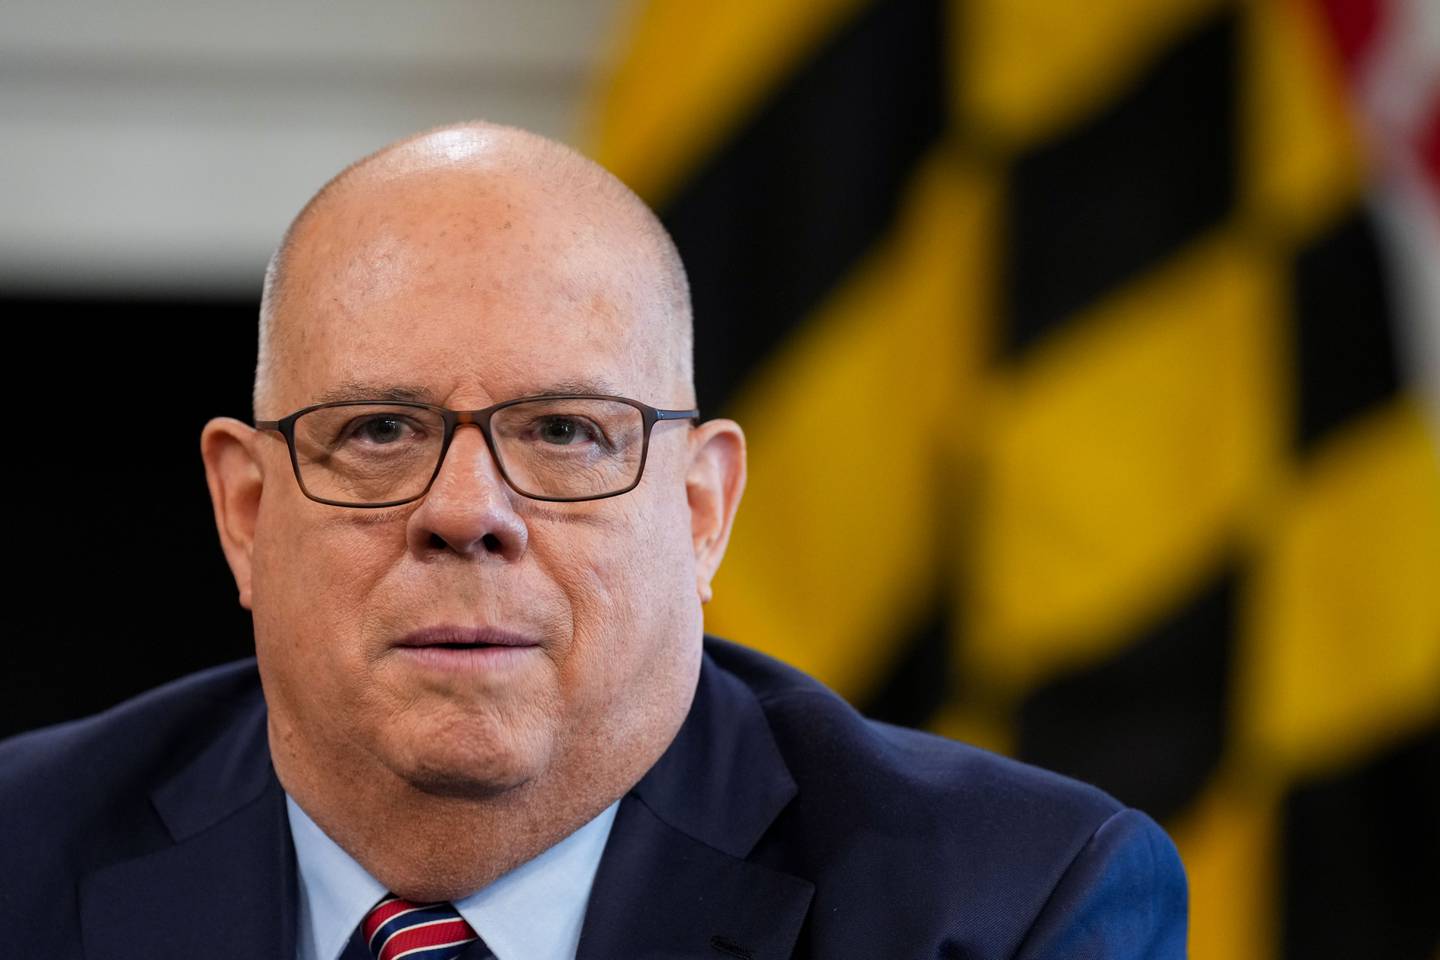 Maryland Gov. Larry Hogan is interviewed in the Governor’s Reception Room at the State House on Monday, December 19.